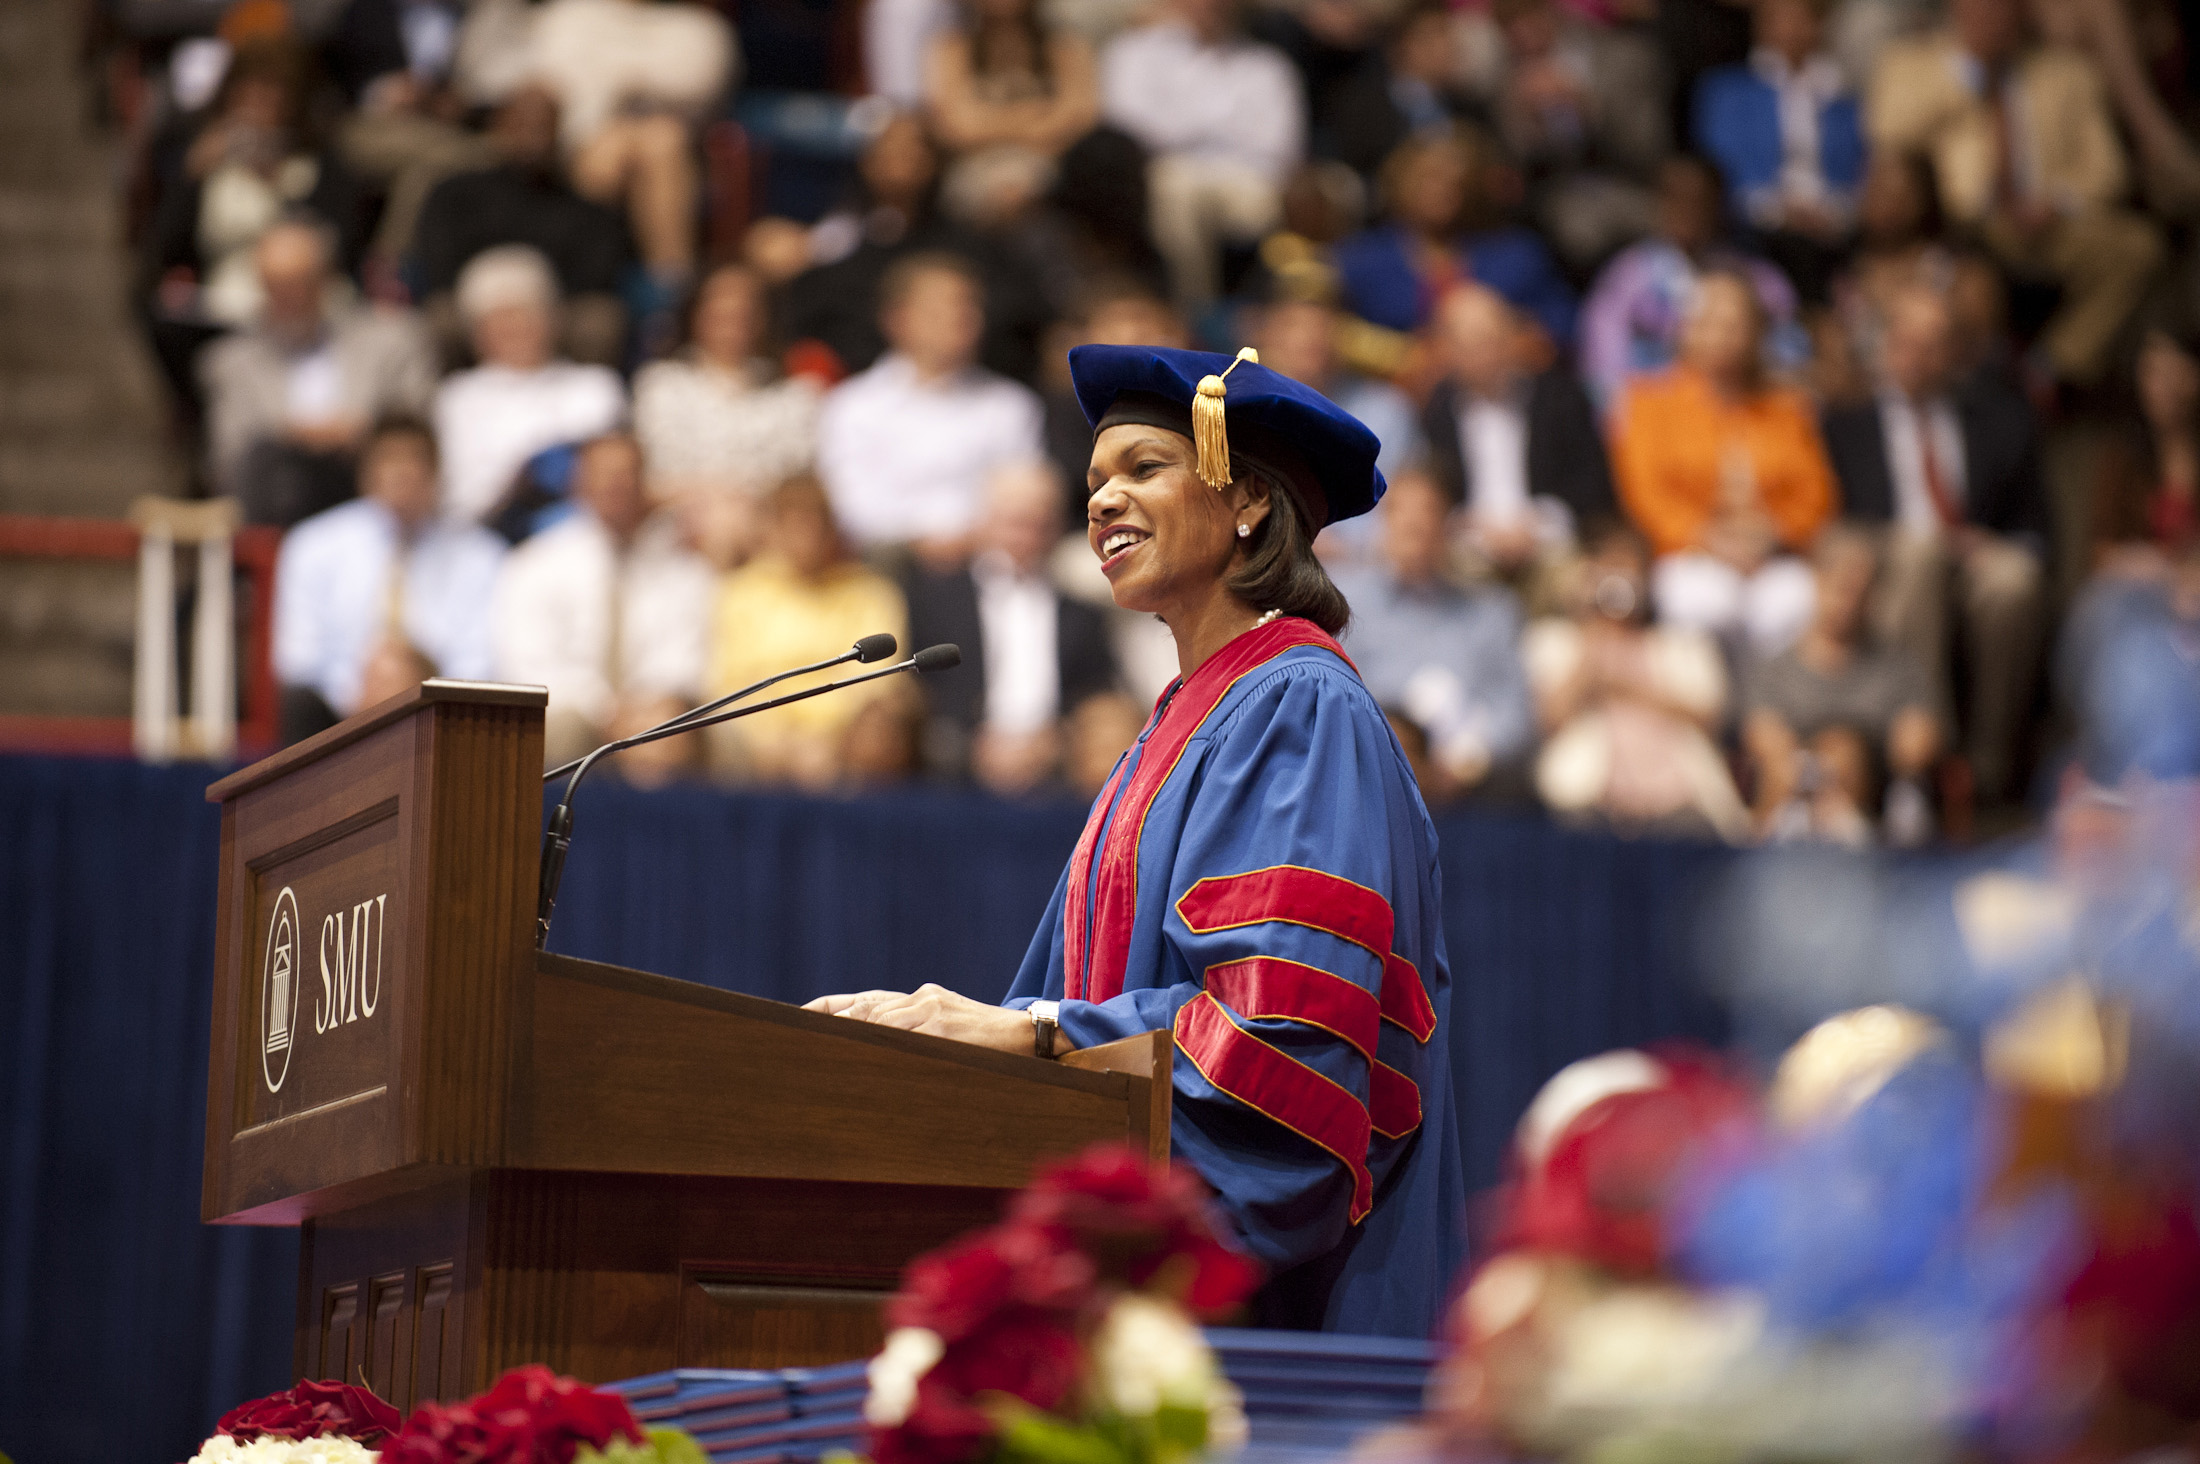 Condoleezza Rice at SMU Commencement on 12 May 2012.